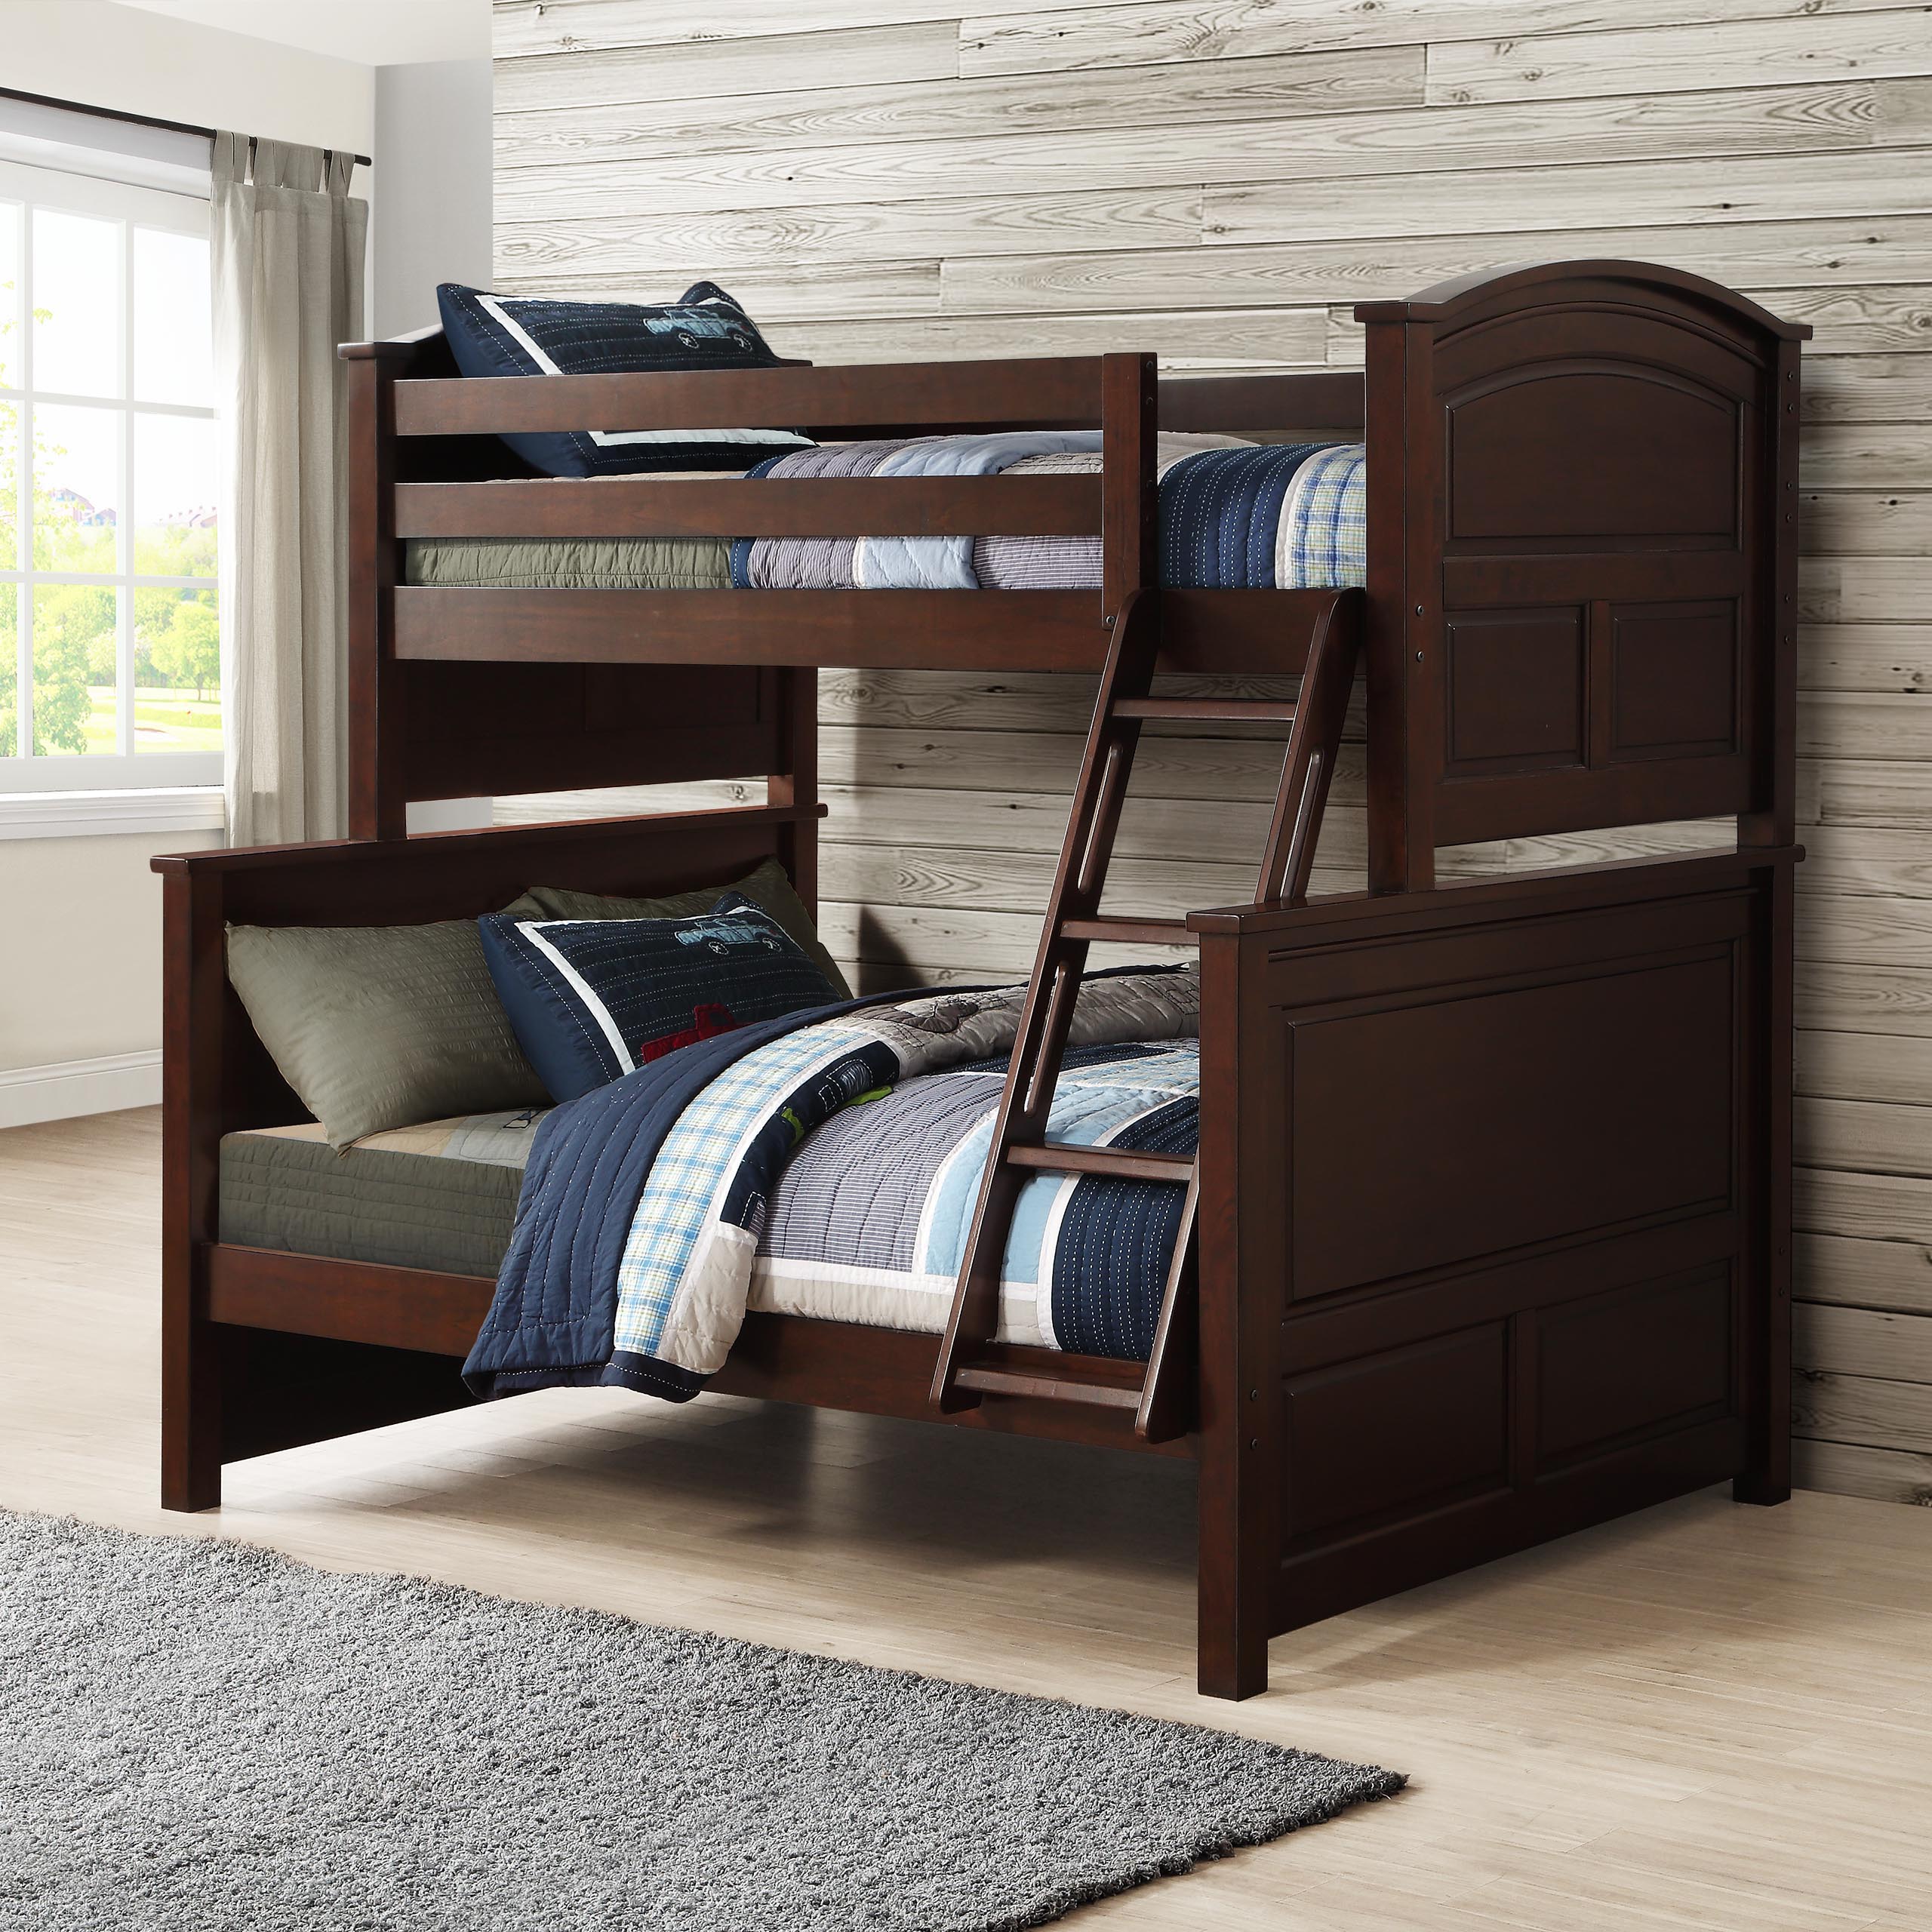 Bayside Furnishings, Twin Over Full Bunk Bed Bedding